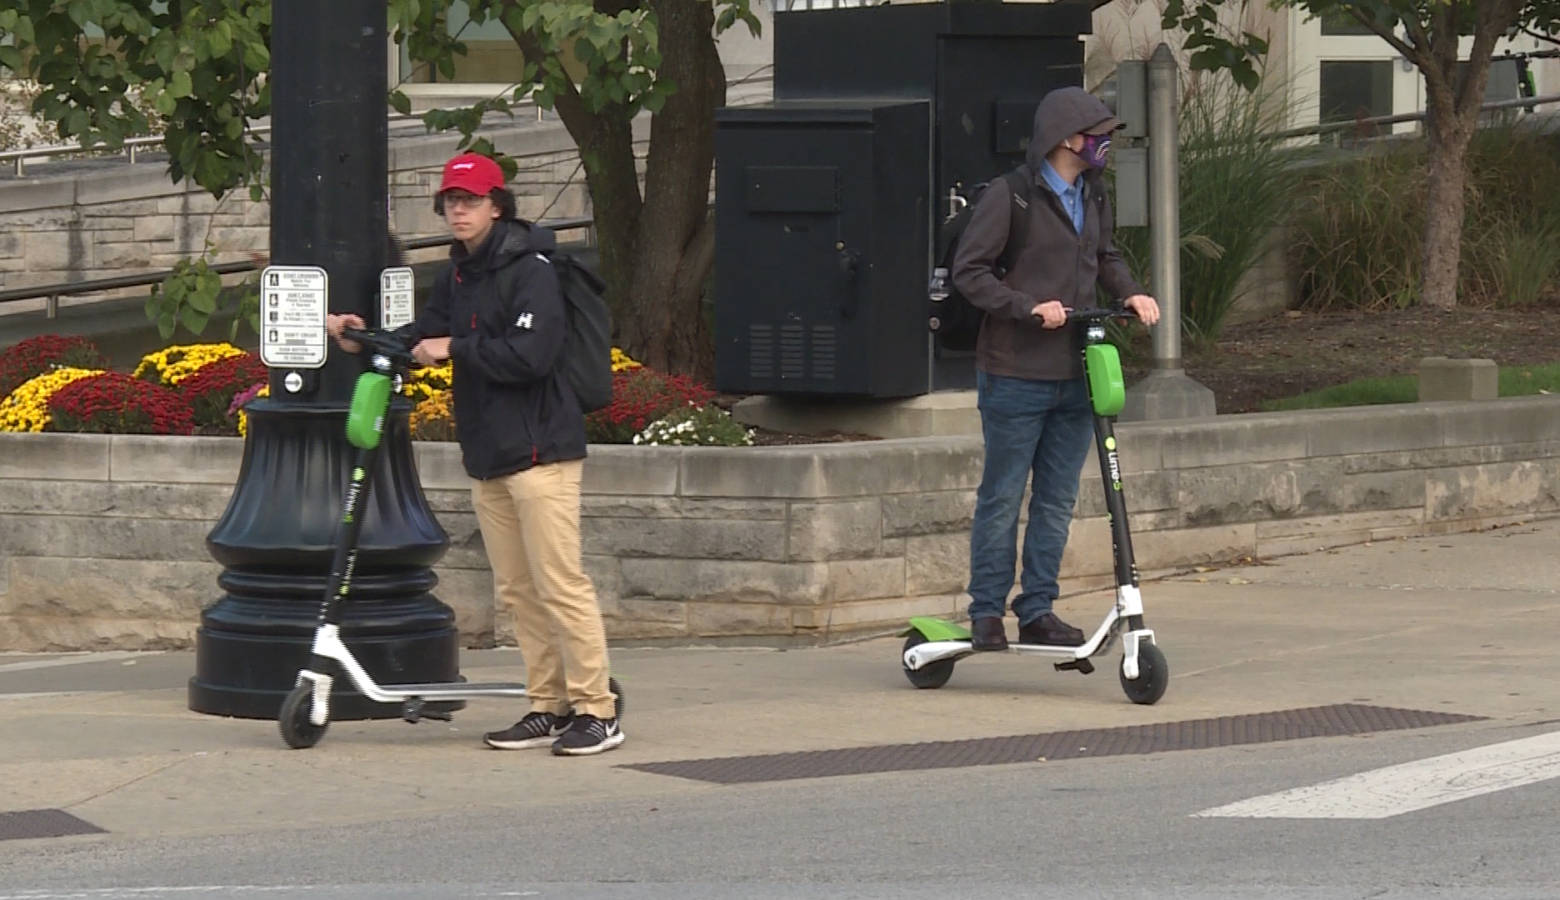 Students catch rides on Lime scooters at Indiana University (Zach Herndon/WTIU)